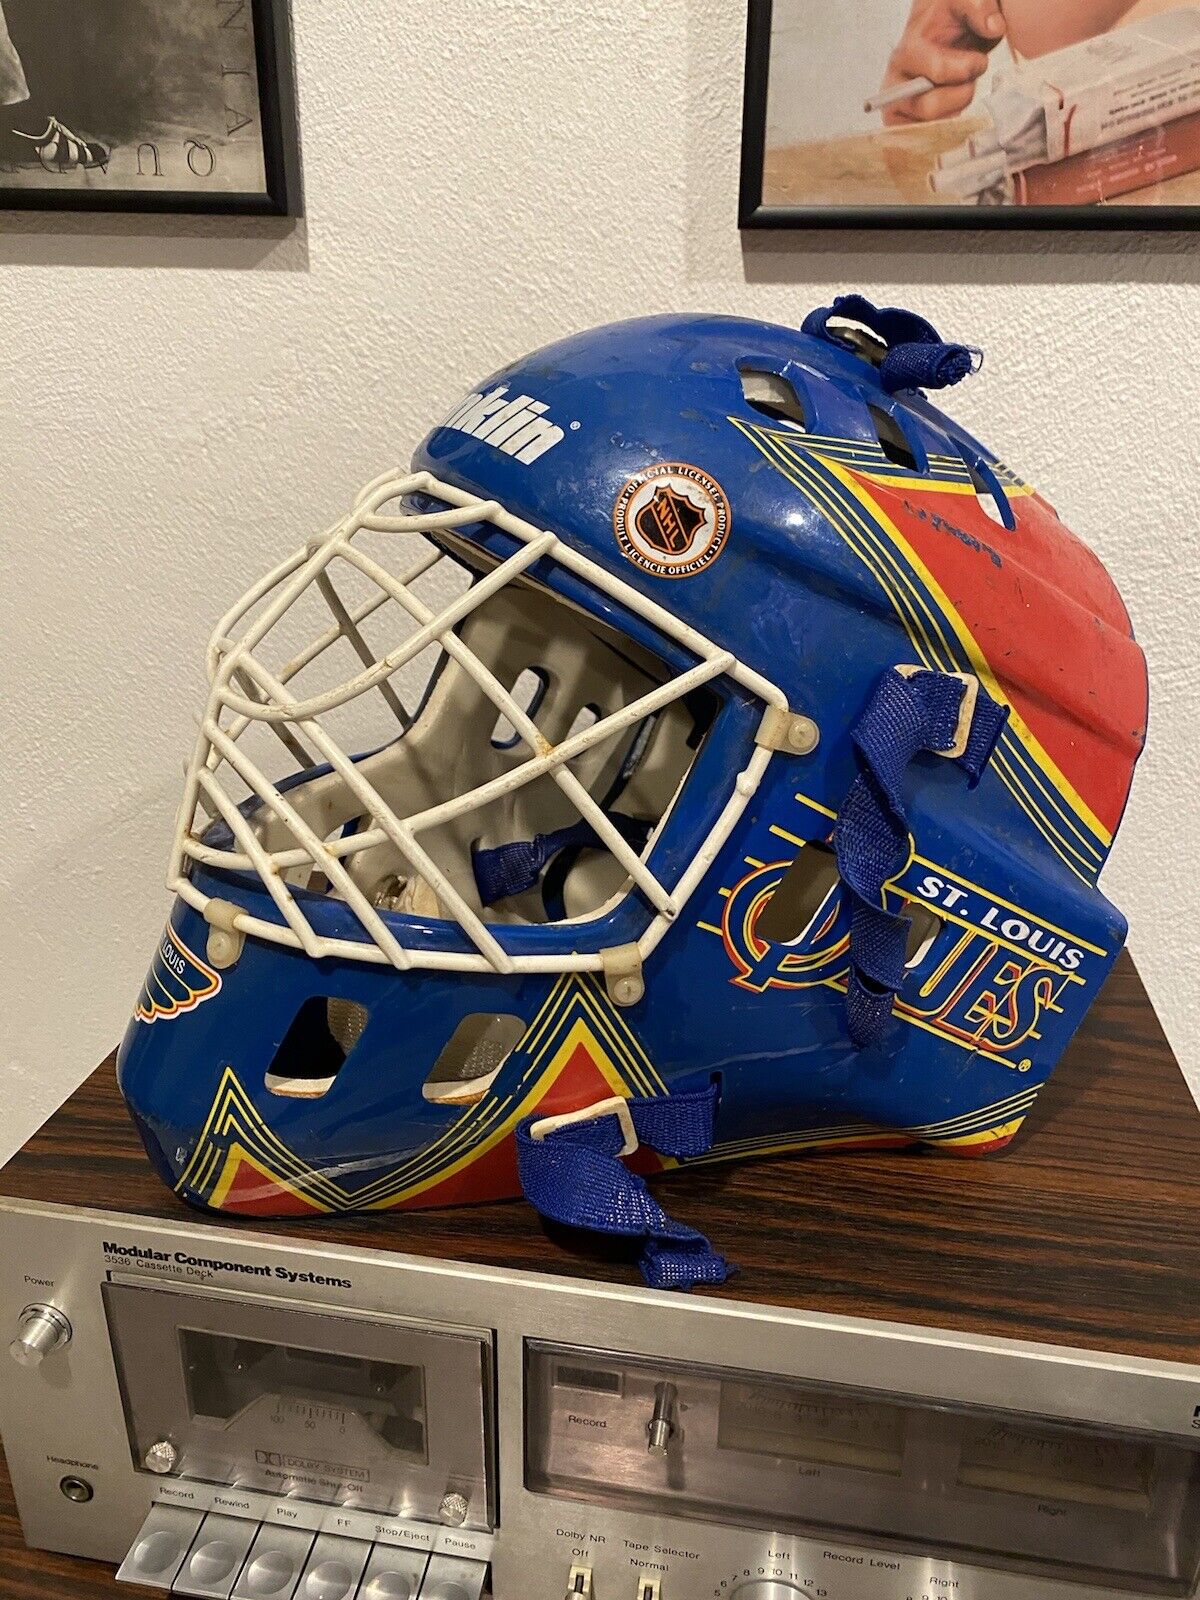  St. Louis Blues Unsigned Franklin Sports Replica Mini Goalie  Mask - Unsigned Mask : Sports & Outdoors